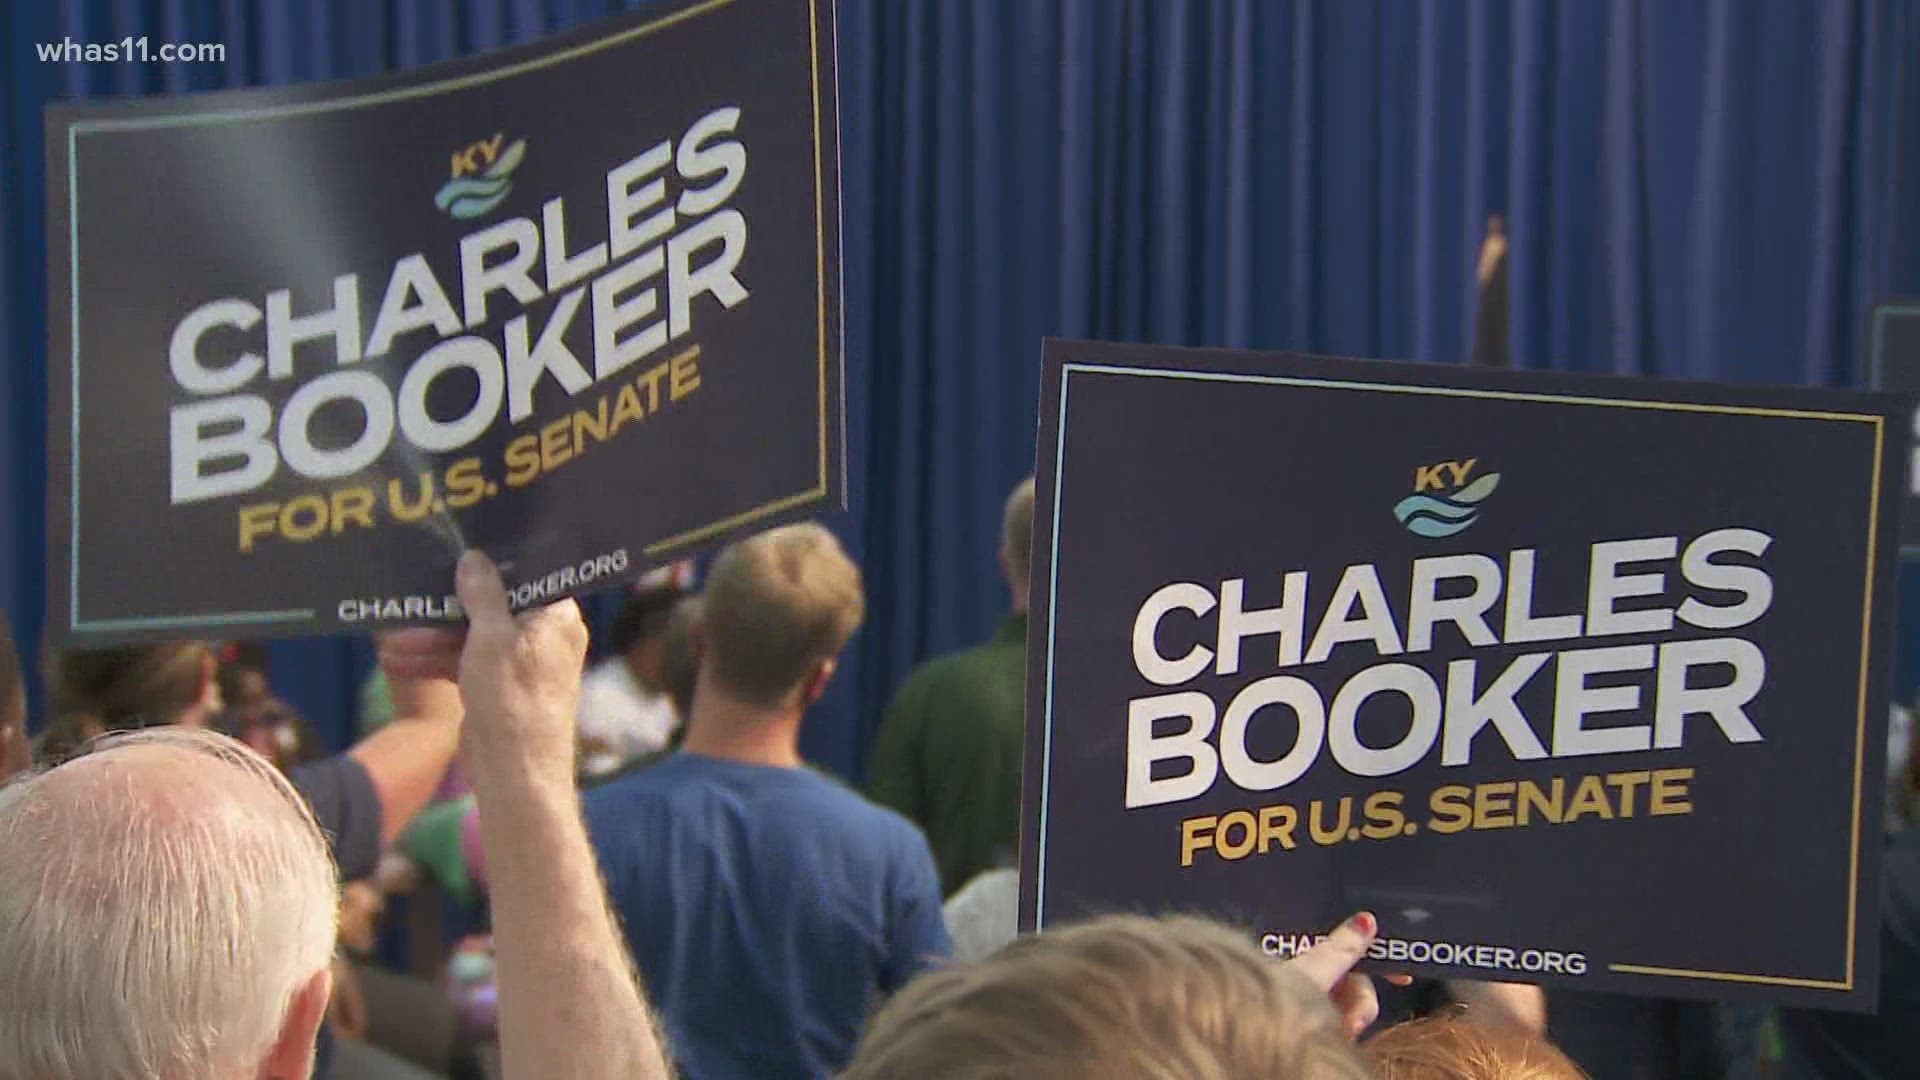 Democrat Charles Booker is running for the U.S. Senate once again. This time he'll be running for a shot to take down Republican Sen. Rand Paul.